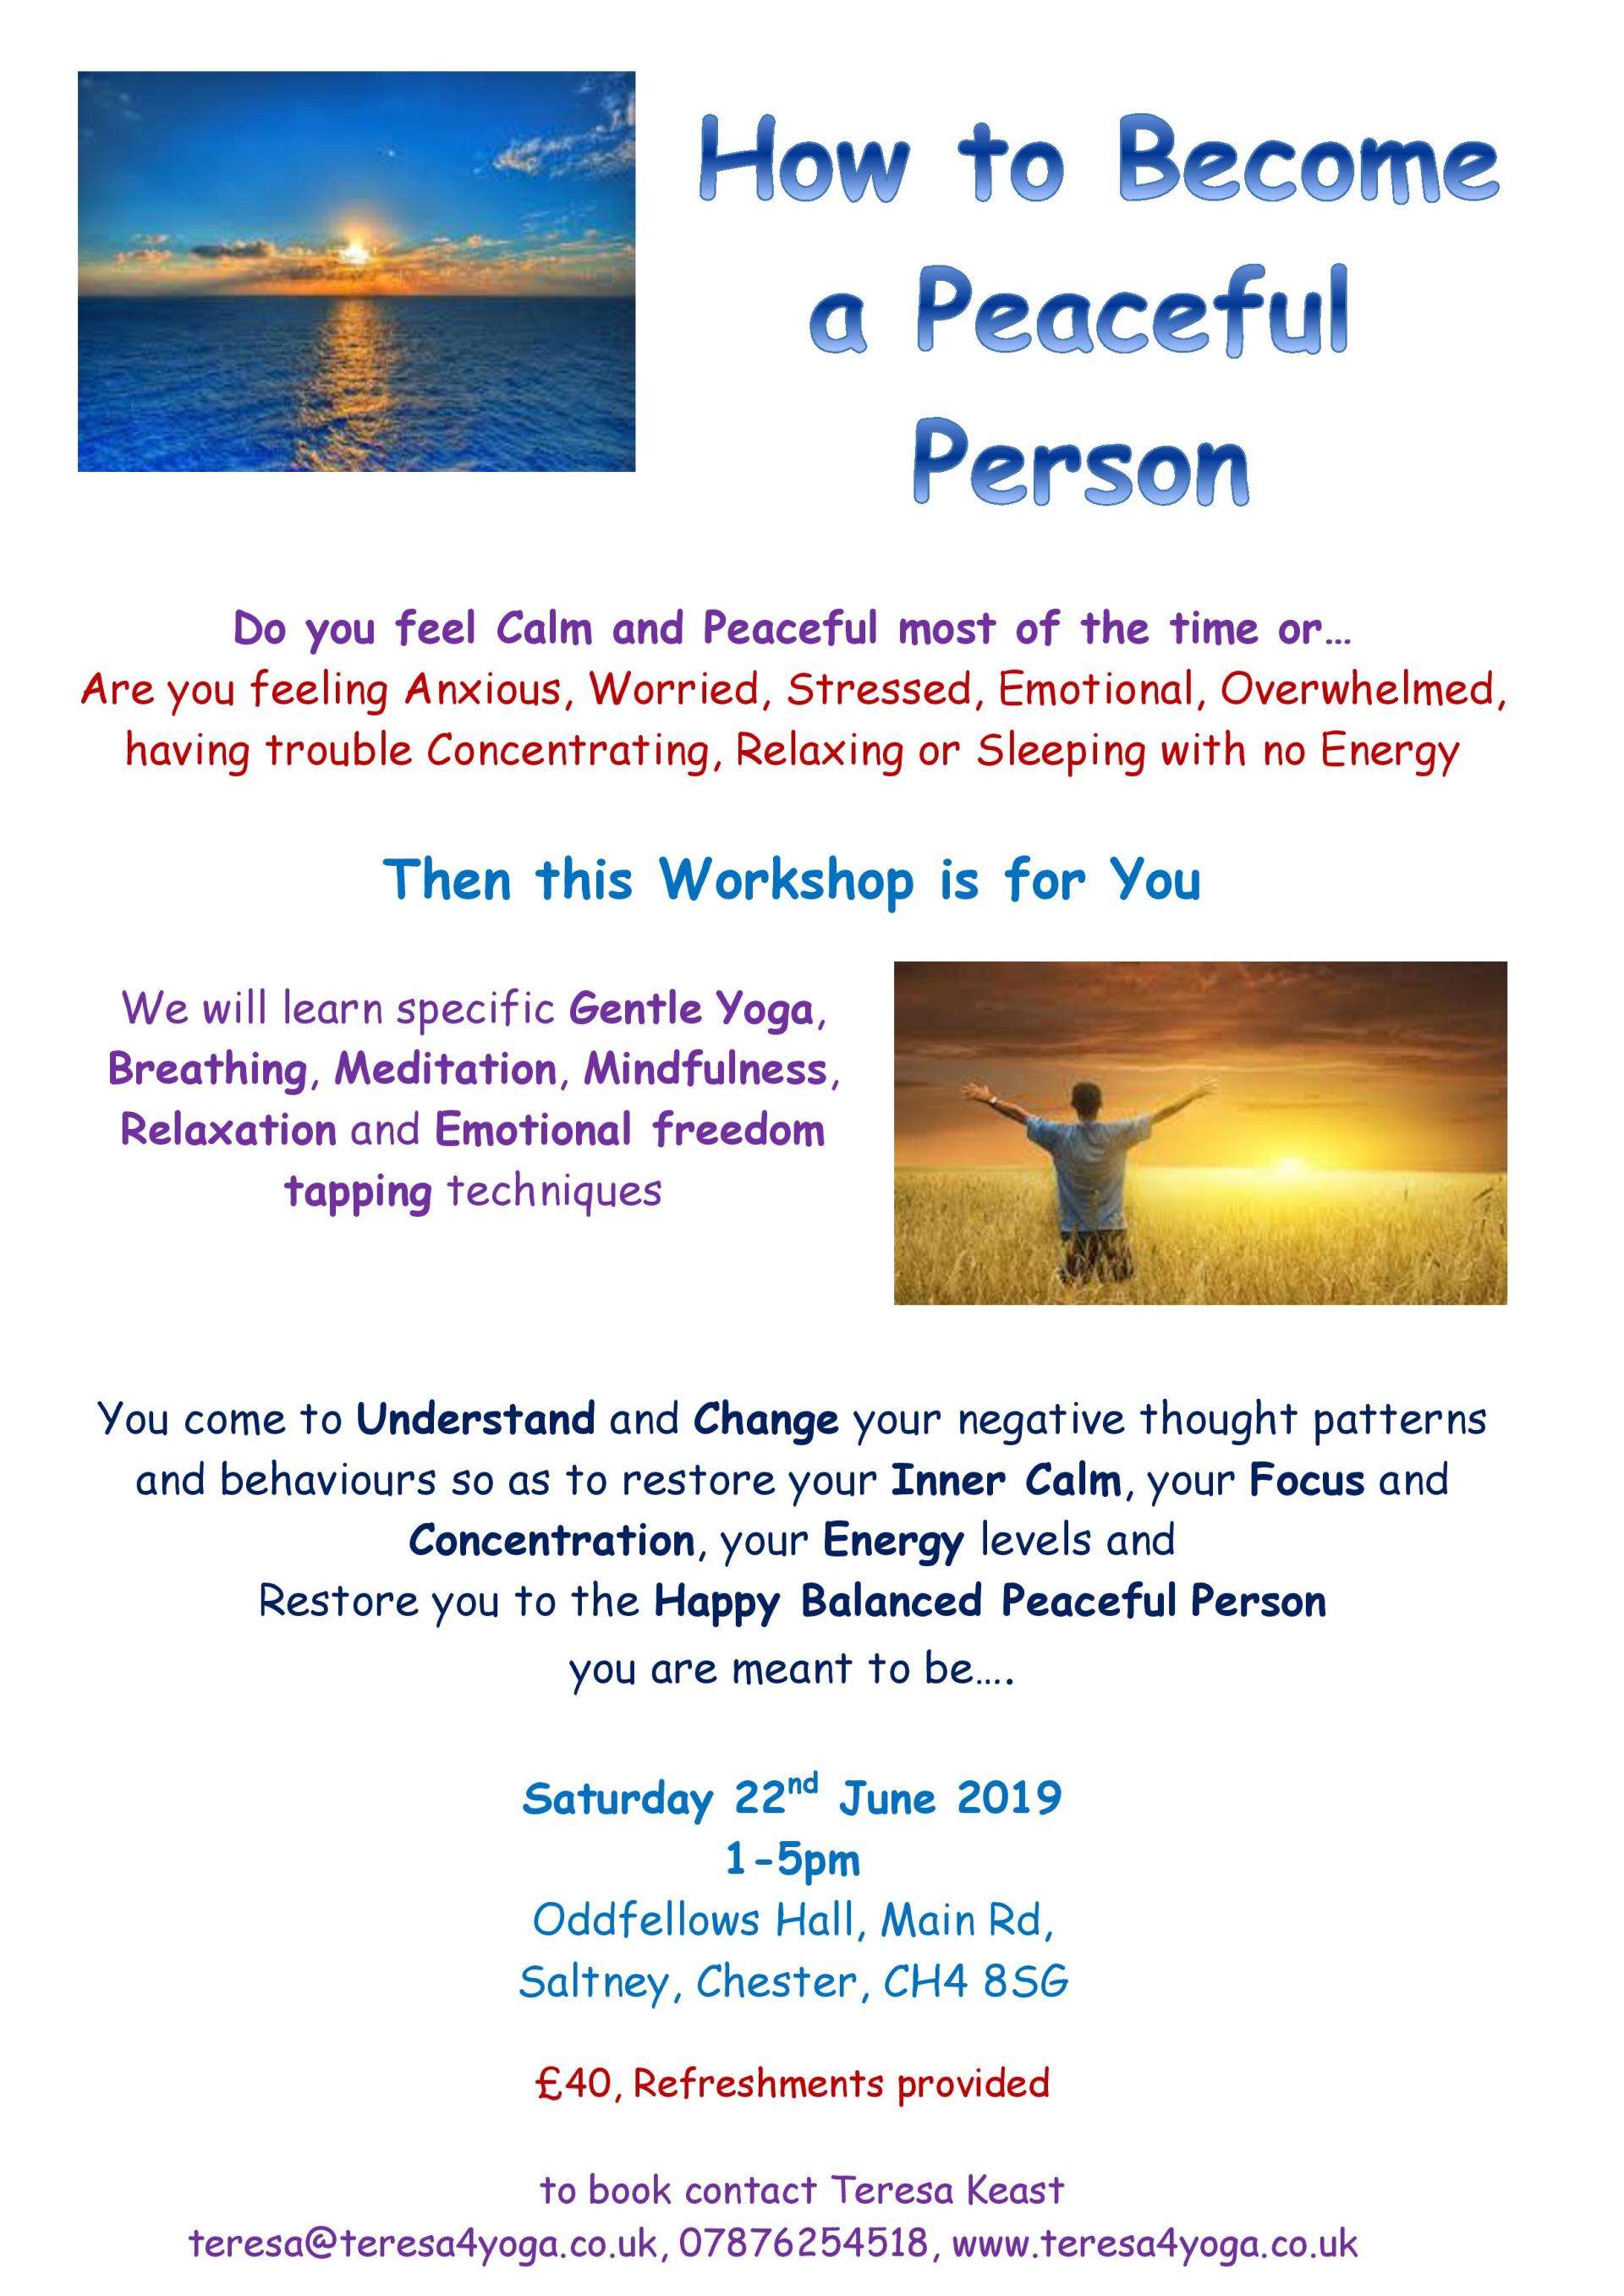 Teresa4Yoga How to be a Peaceful Person workshop